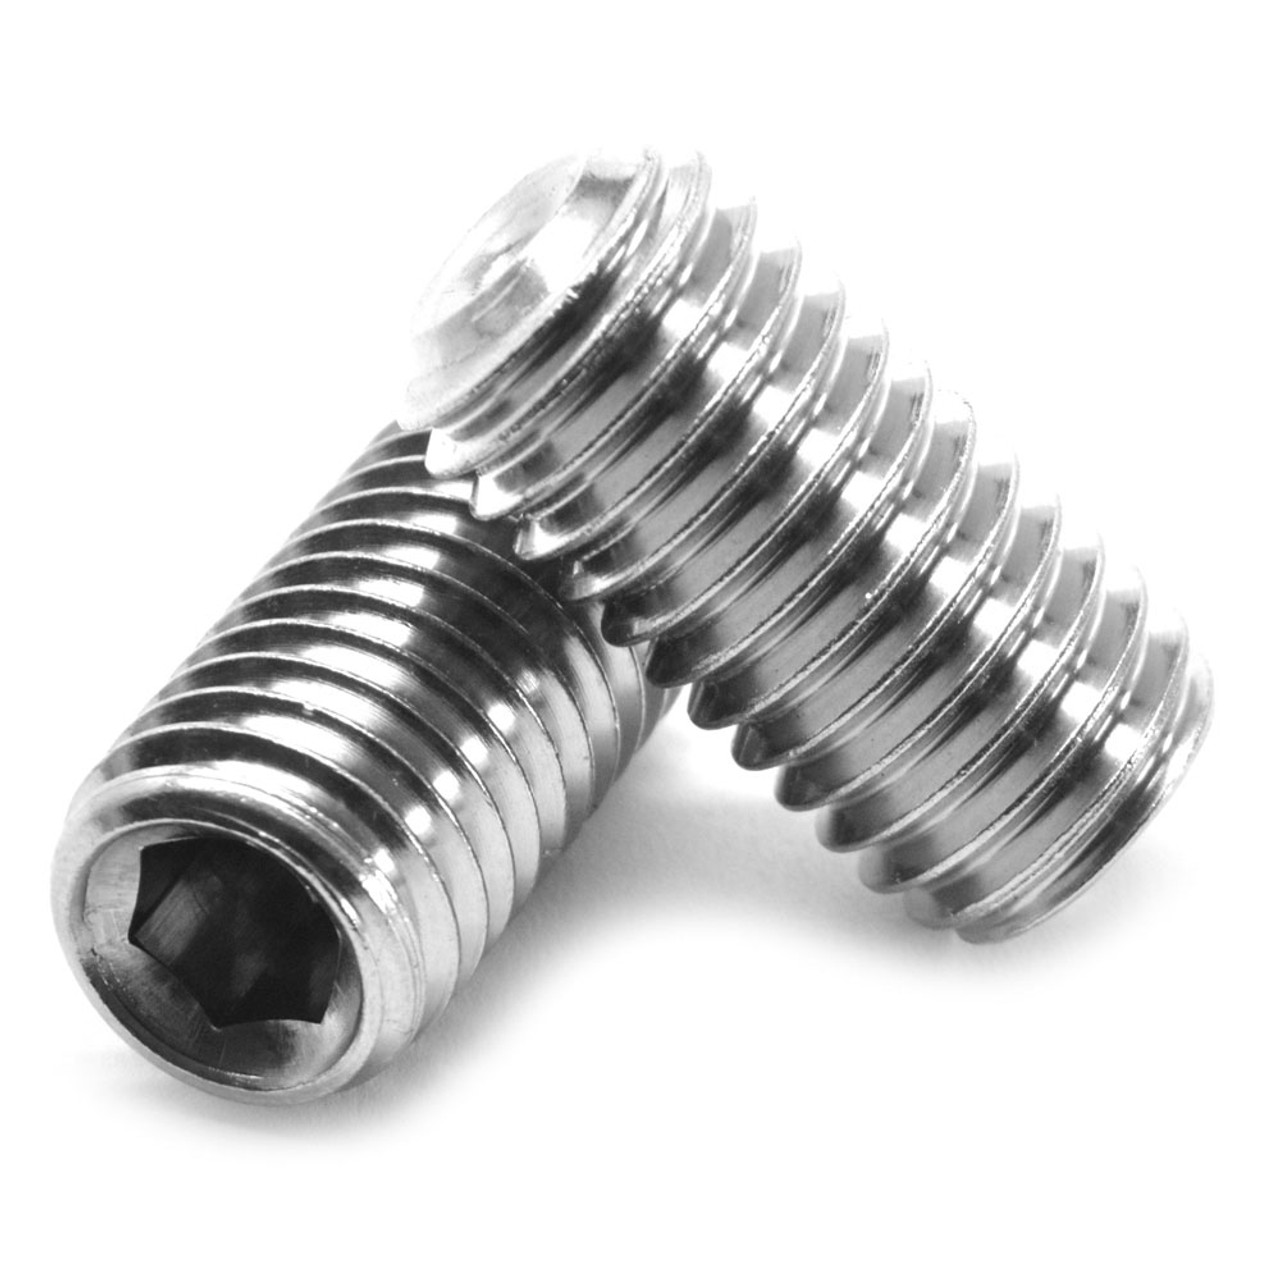 M3 x 0.50 x 20 MM Coarse Thread DIN 916 / ISO 4029 Socket Set Screw Cup Point Stainless Steel 316